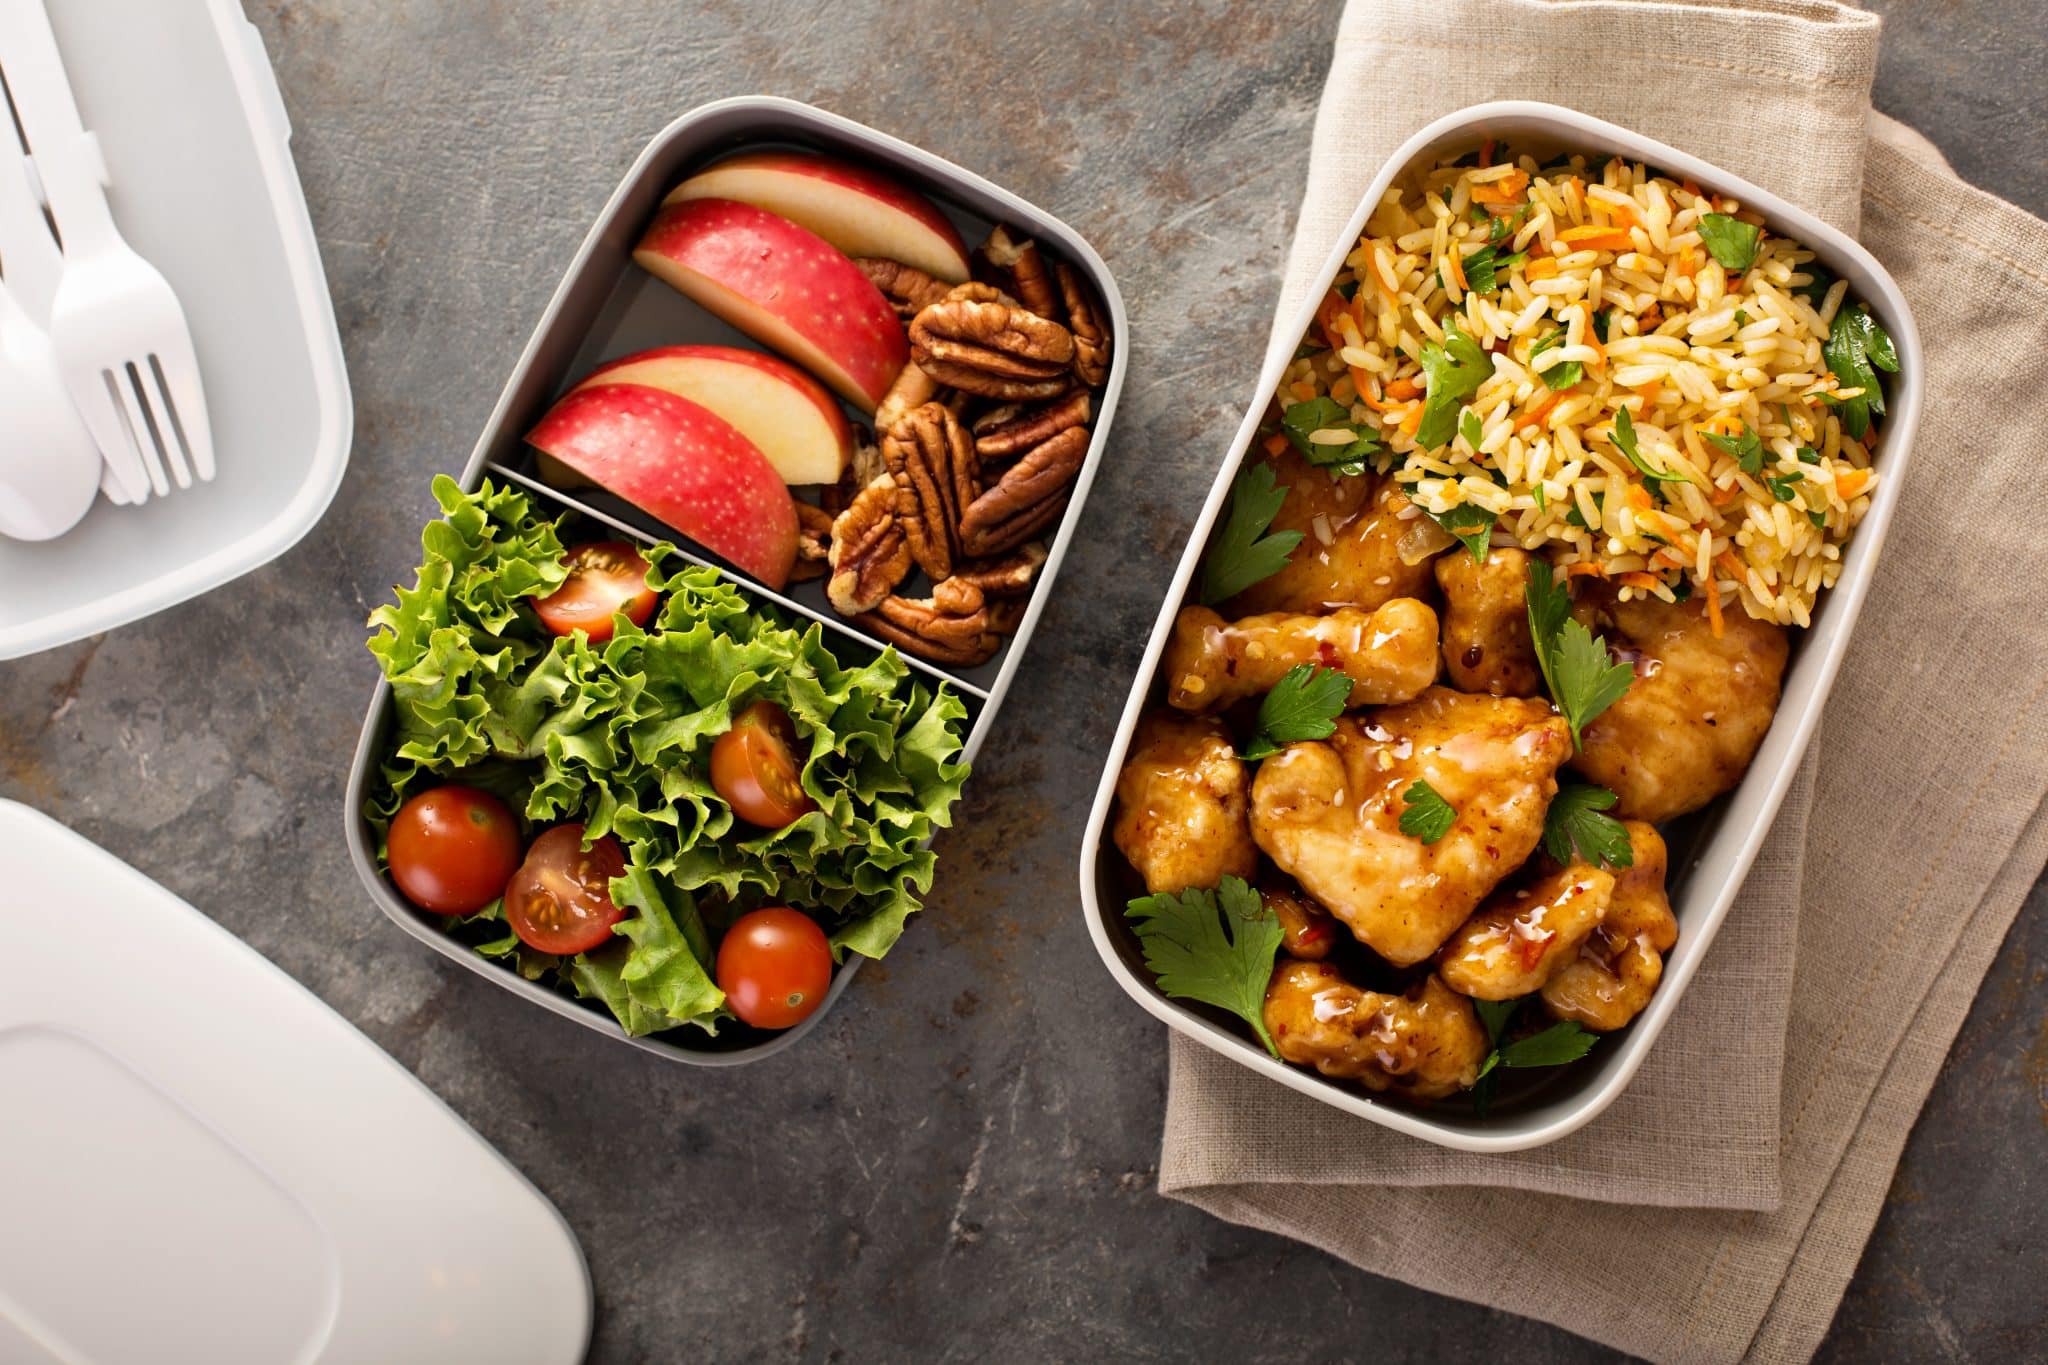 Reasons Why Home-Cooked Food Delivery is Better Than Takeouts